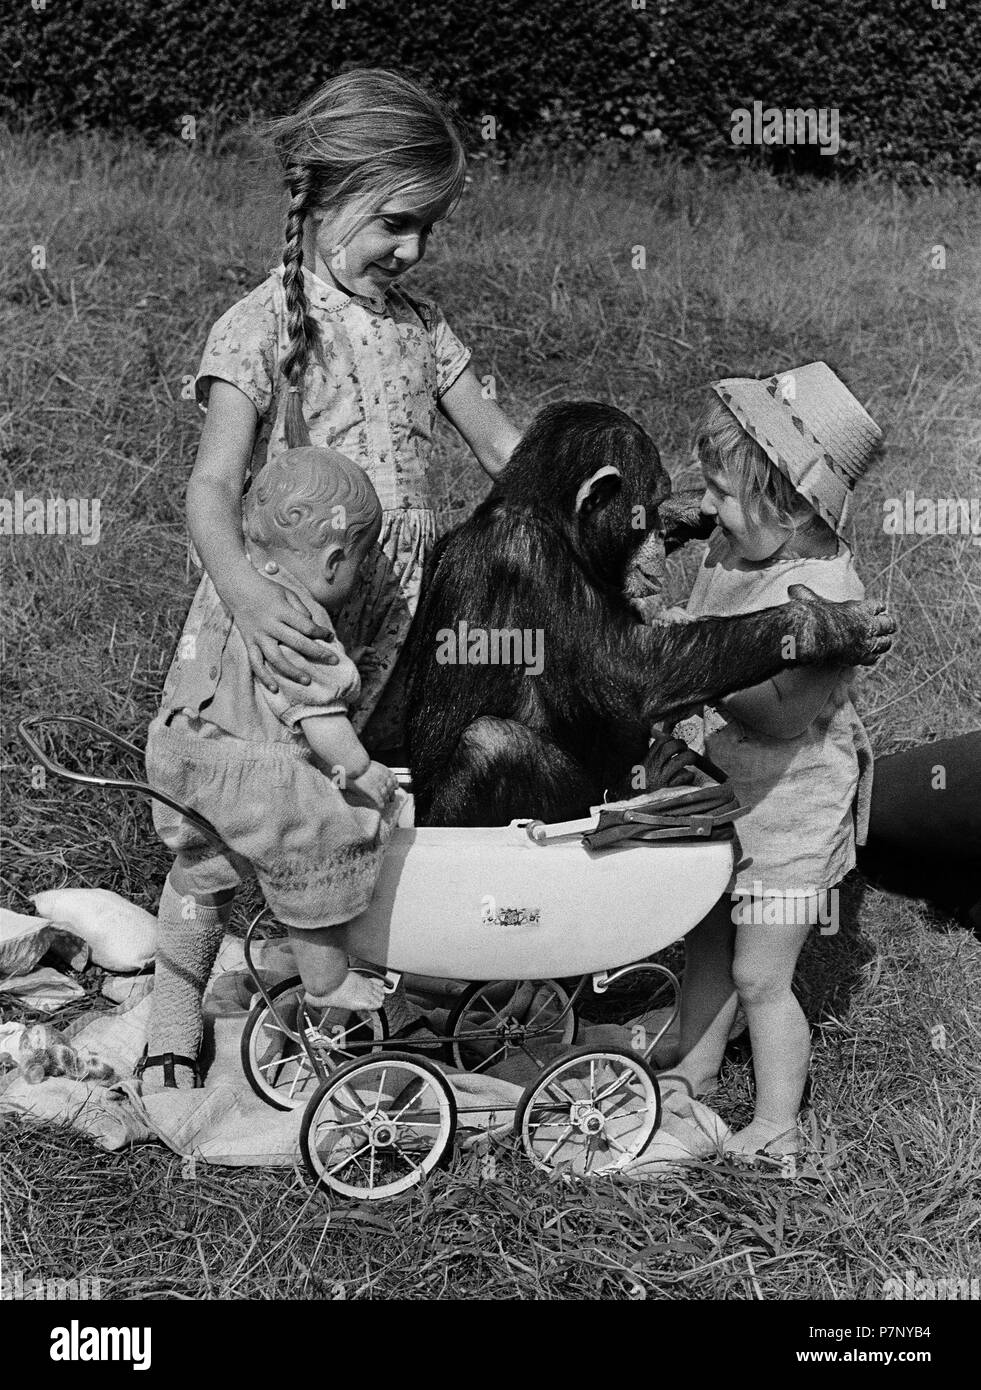 Girls play with chimpanzee in a stroller, England, Great Britain Stock Photo